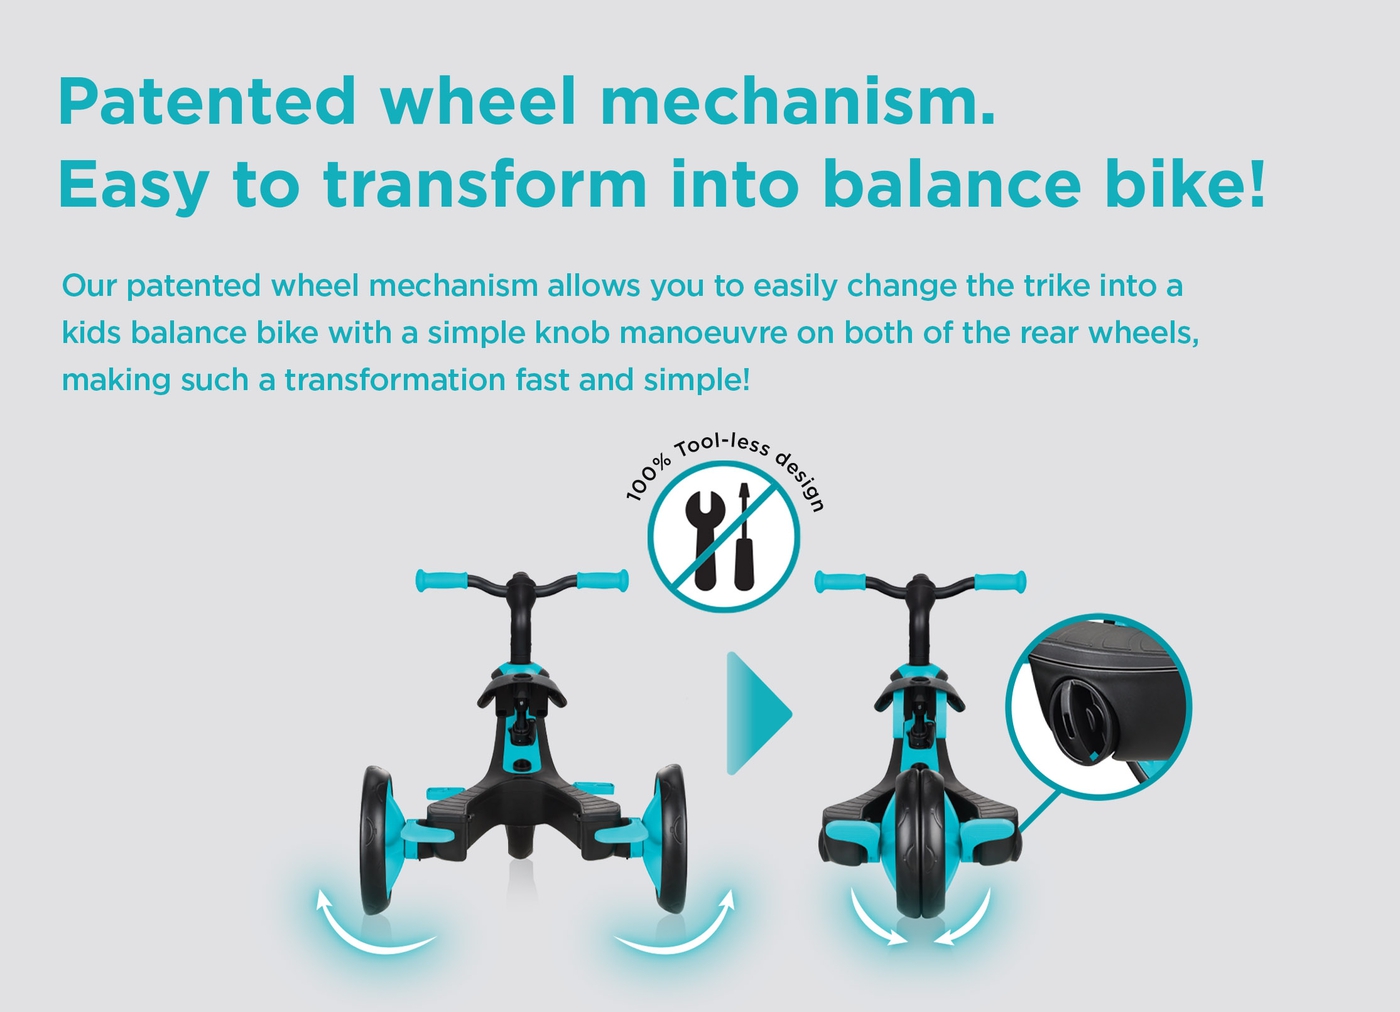 Patented wheel mechanism. Easy to transform into balance bike! Our patented wheel mechanism allows you to easily change the trike into a kids balance bike with a simple knob manoeuvre on both of the rear wheels, making such a transformation fast and simple! 